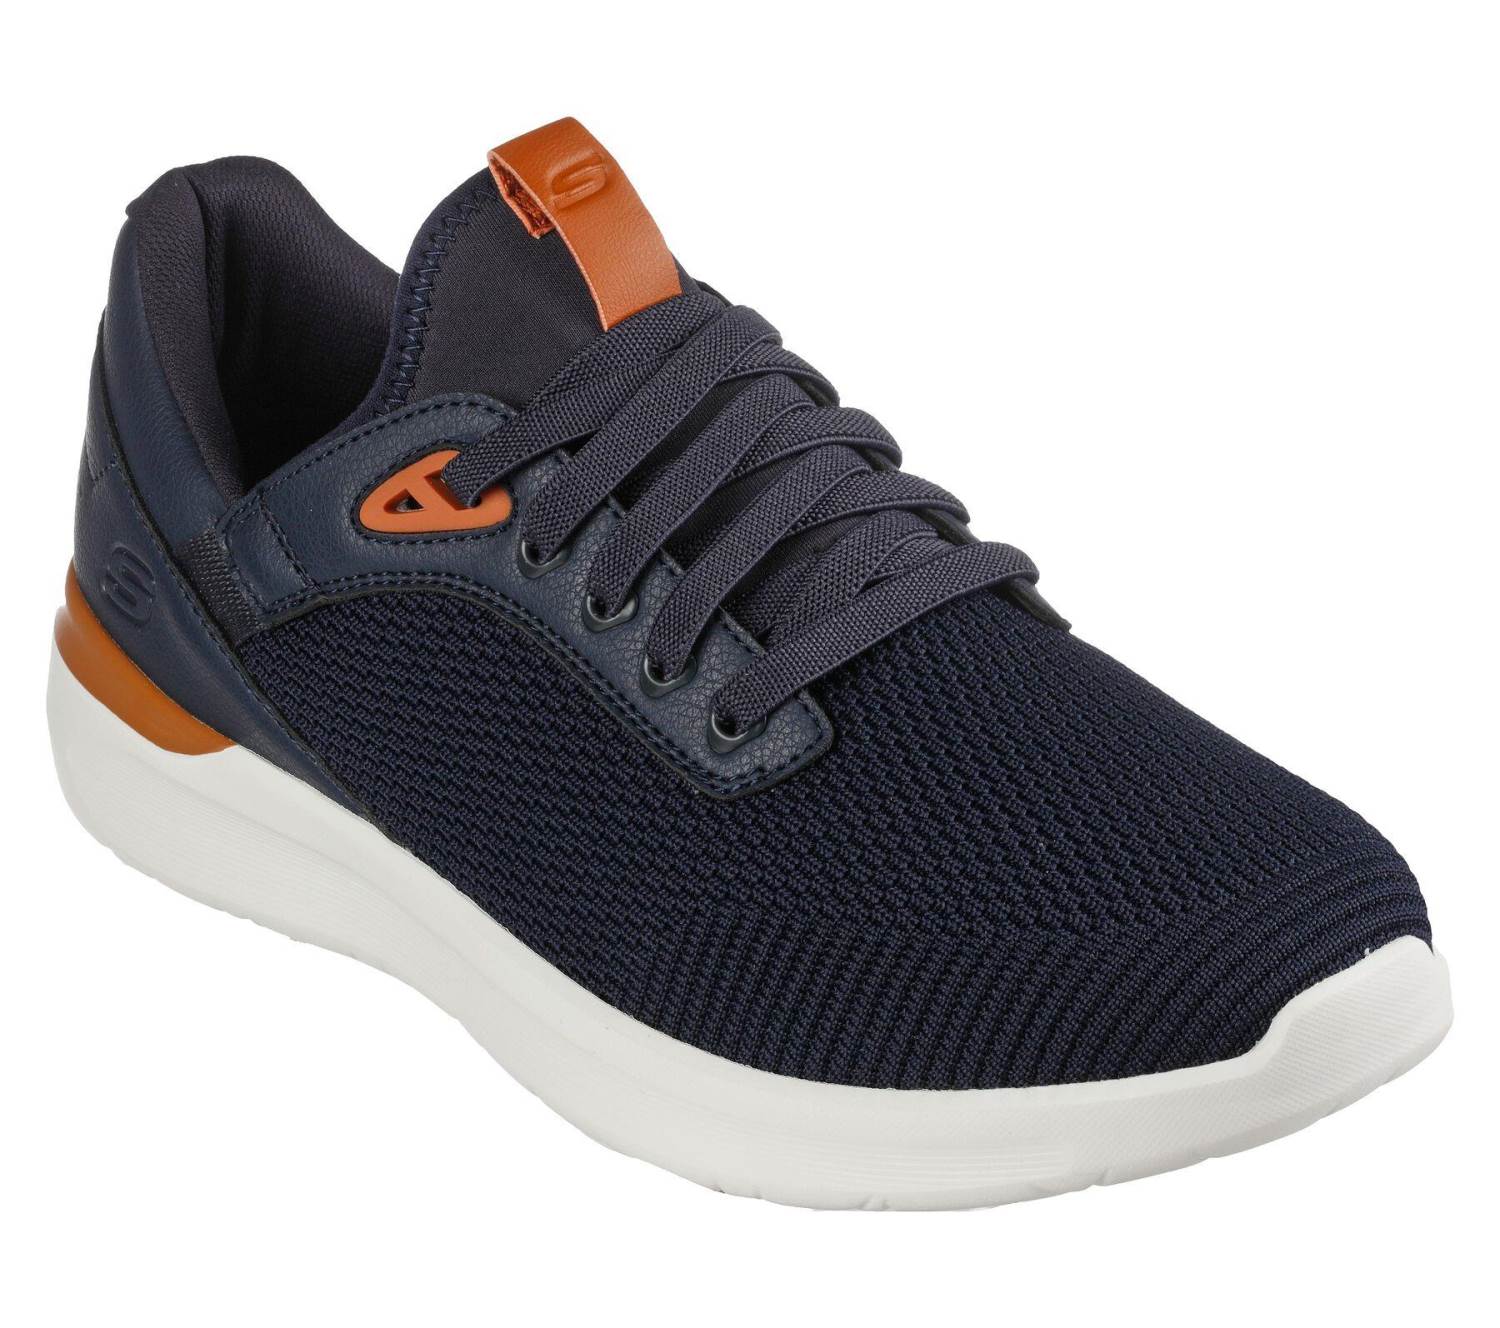 Skechers Brand Mens Casual Air Memory Sports Shoes 210406 (Navy) RAJASHOES